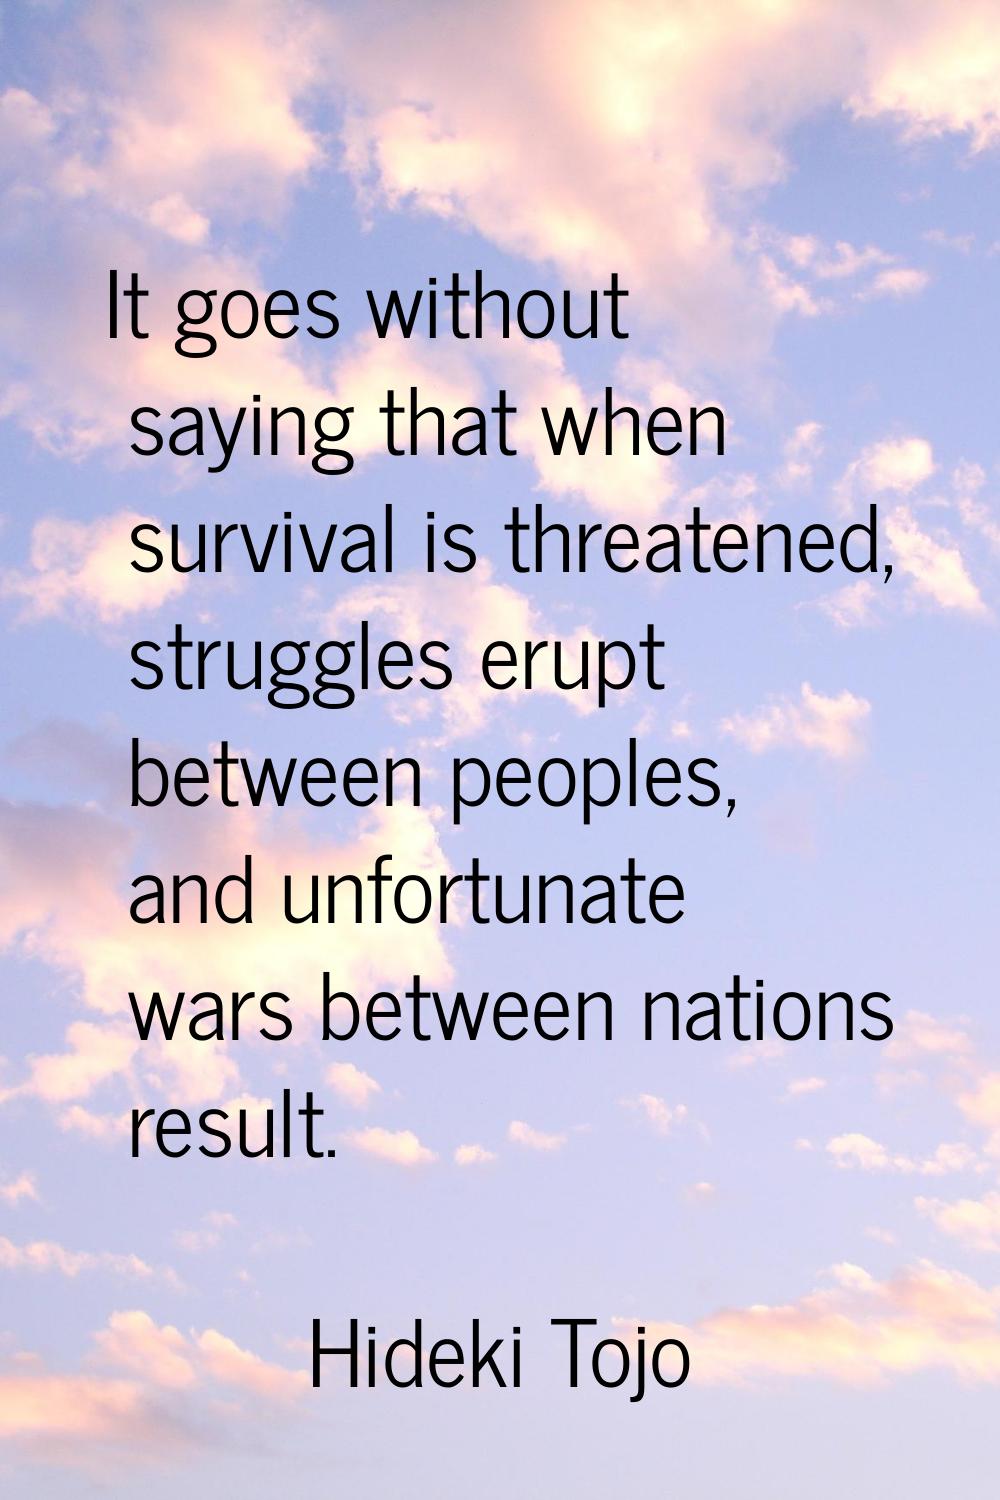 It goes without saying that when survival is threatened, struggles erupt between peoples, and unfor